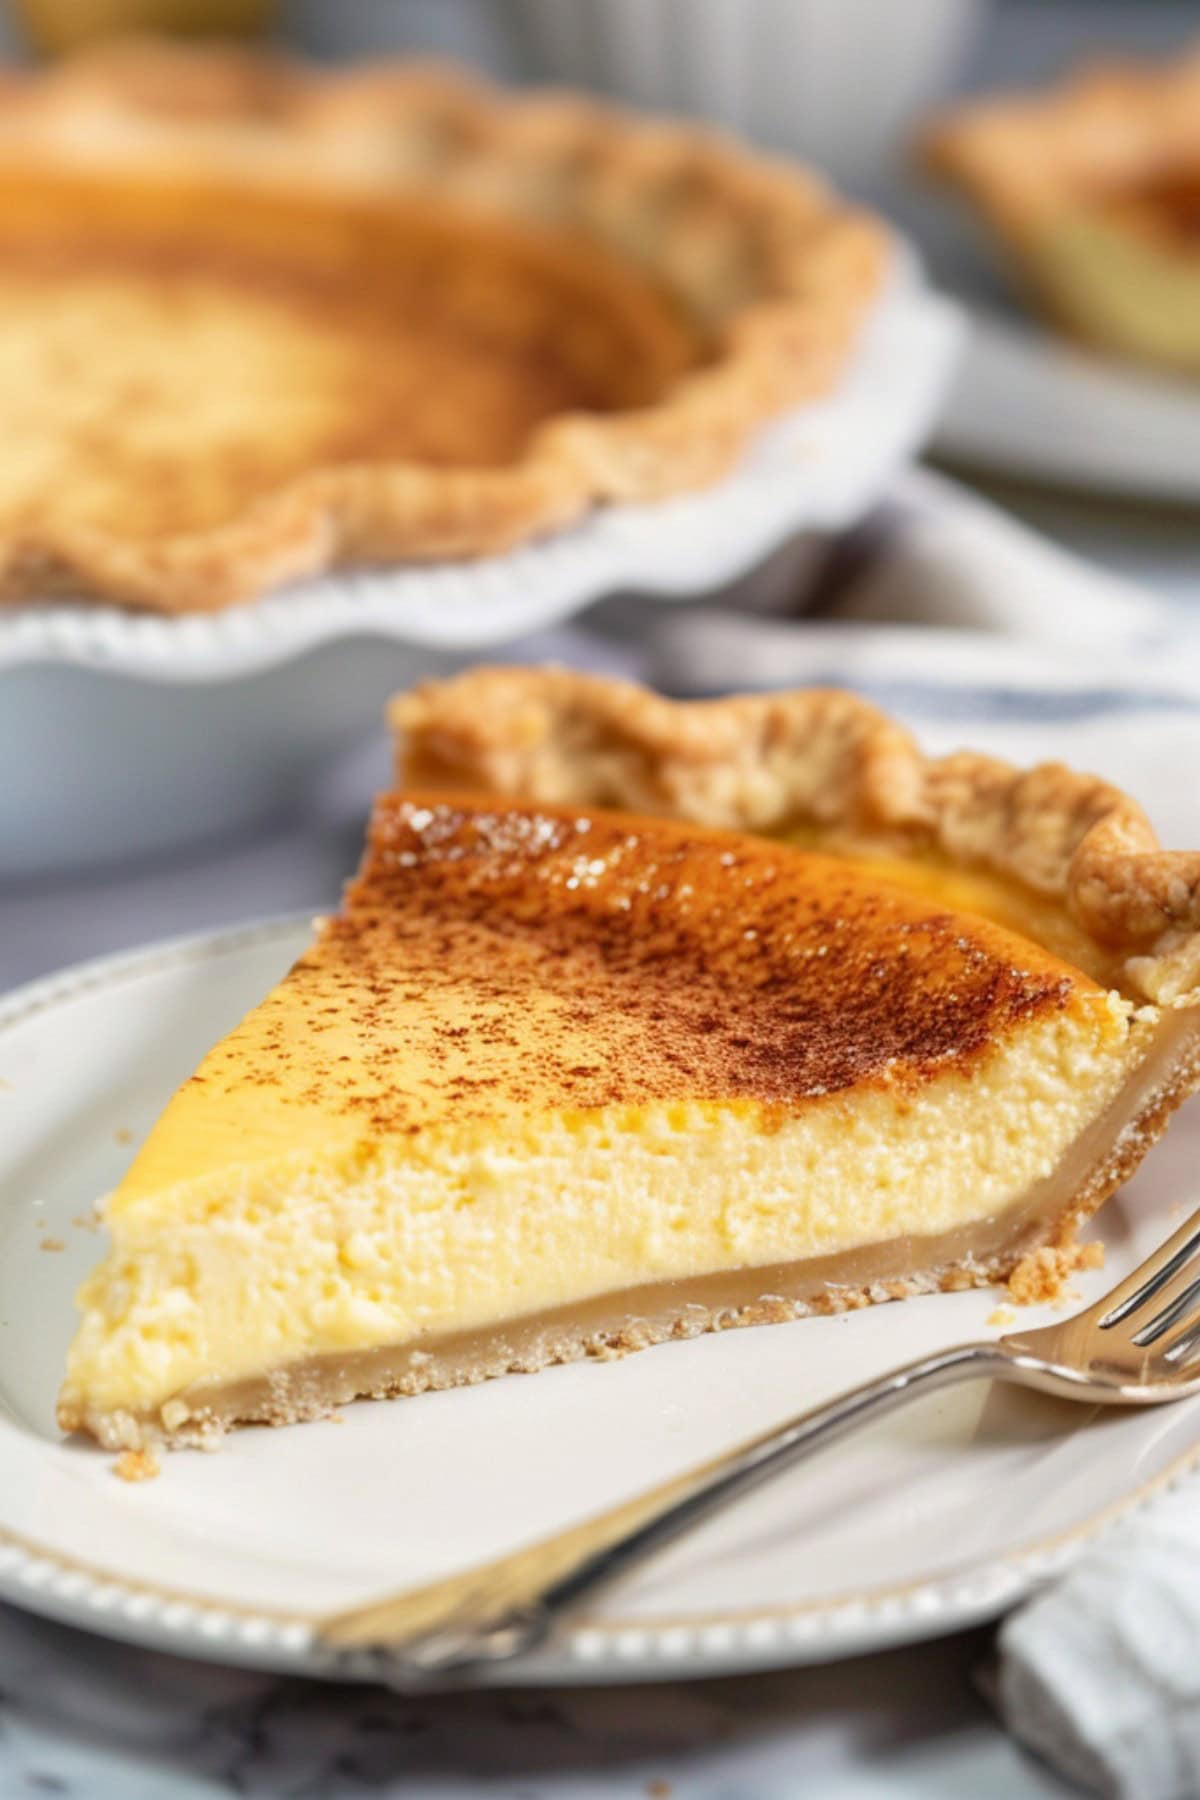 A slice of custard pie on a plate with a fork